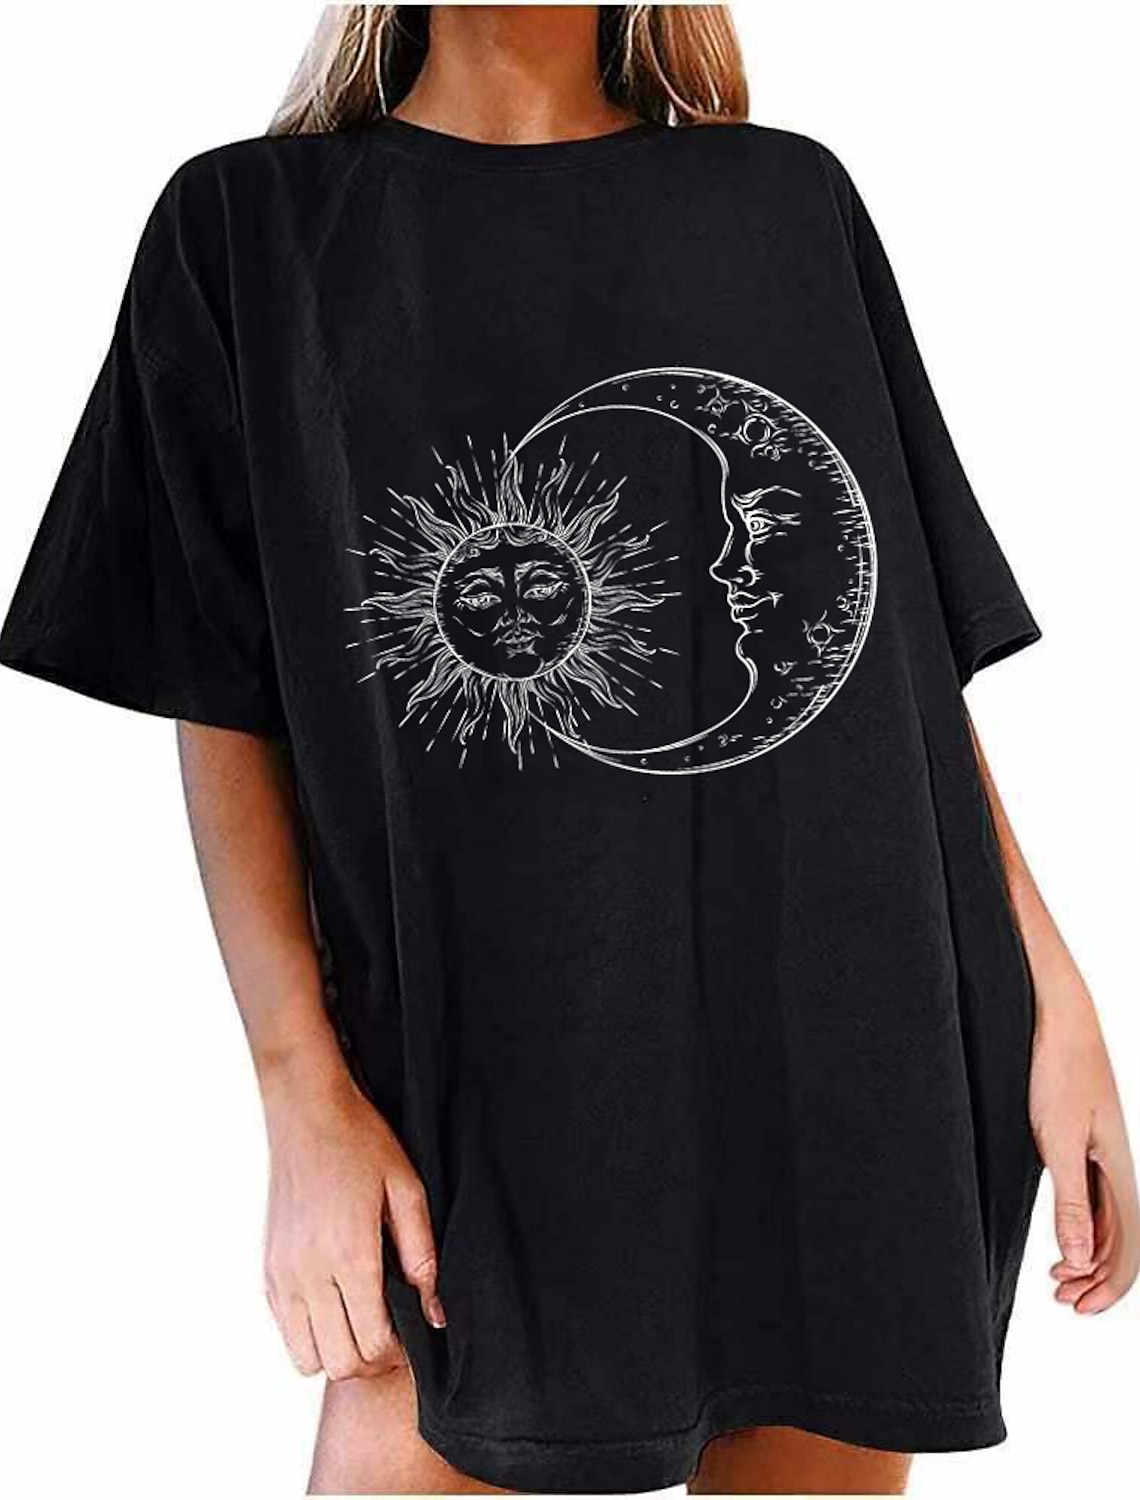 Womens Dandelion Printed Summer Tops Casual Loose Blouses Graphic Tees Shirts Tunic Top AODONG Short Sleeve Shirts for Women 